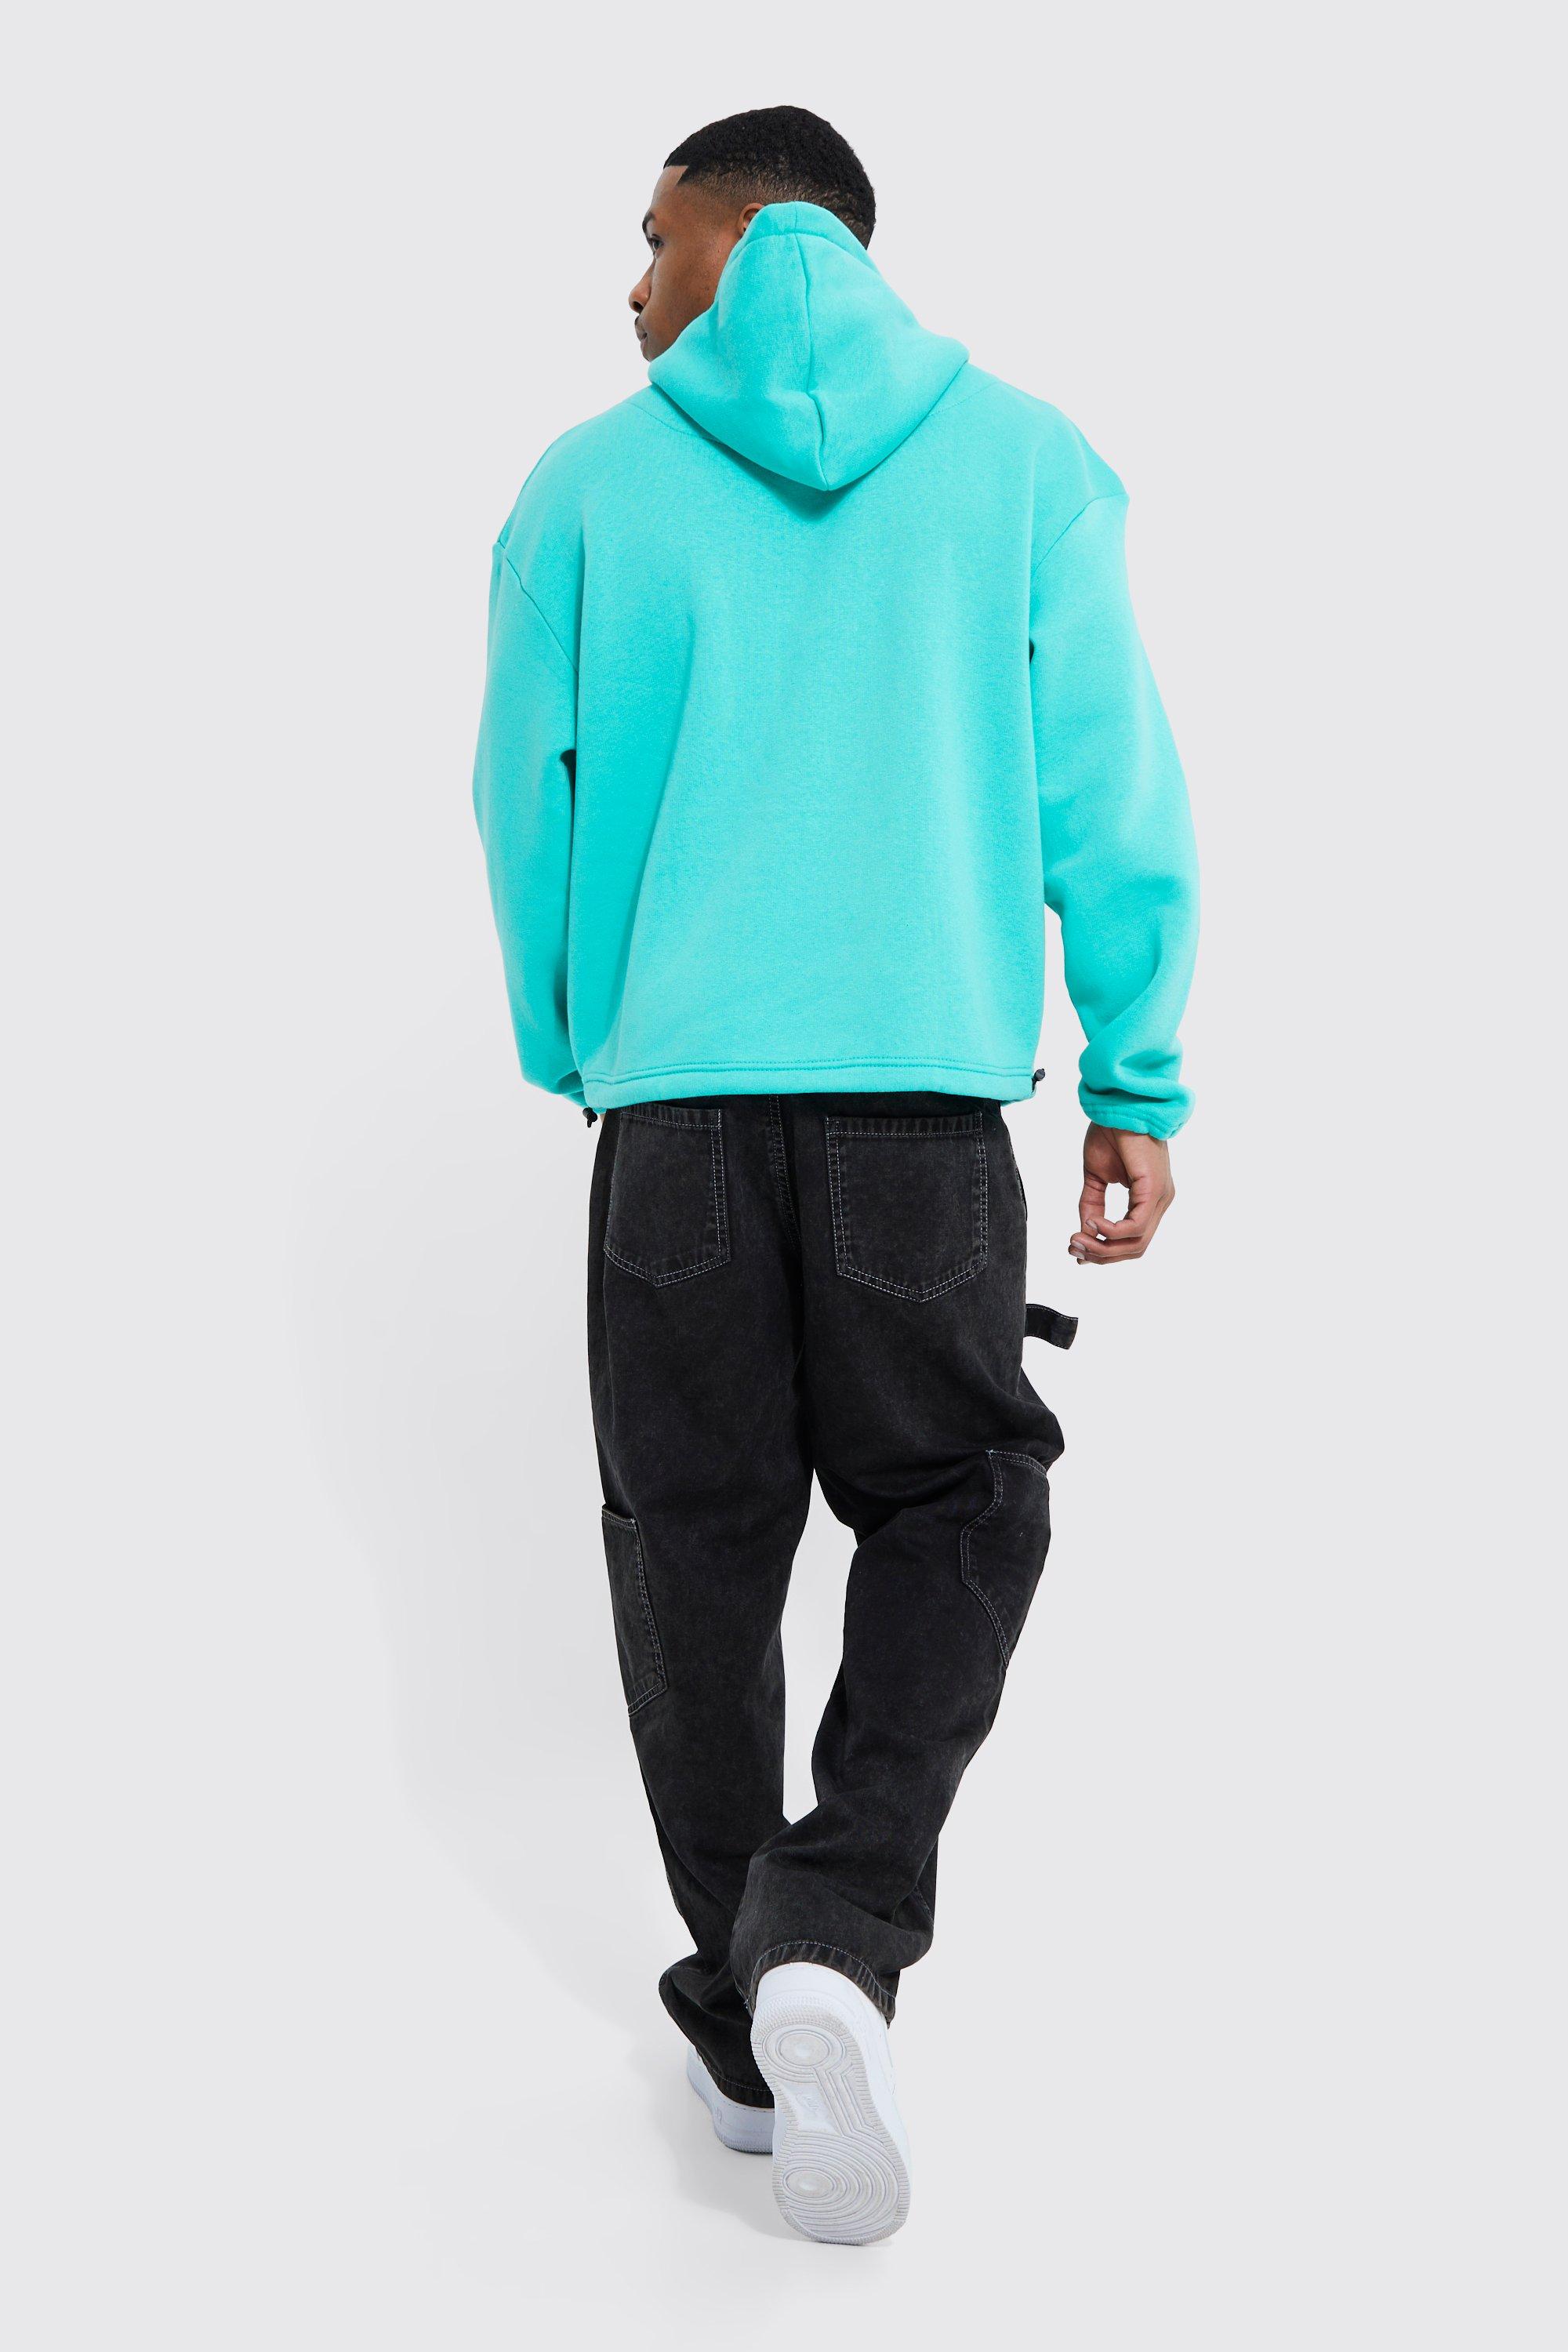 Boxy Oversized Bungee Hem Official Hoodie